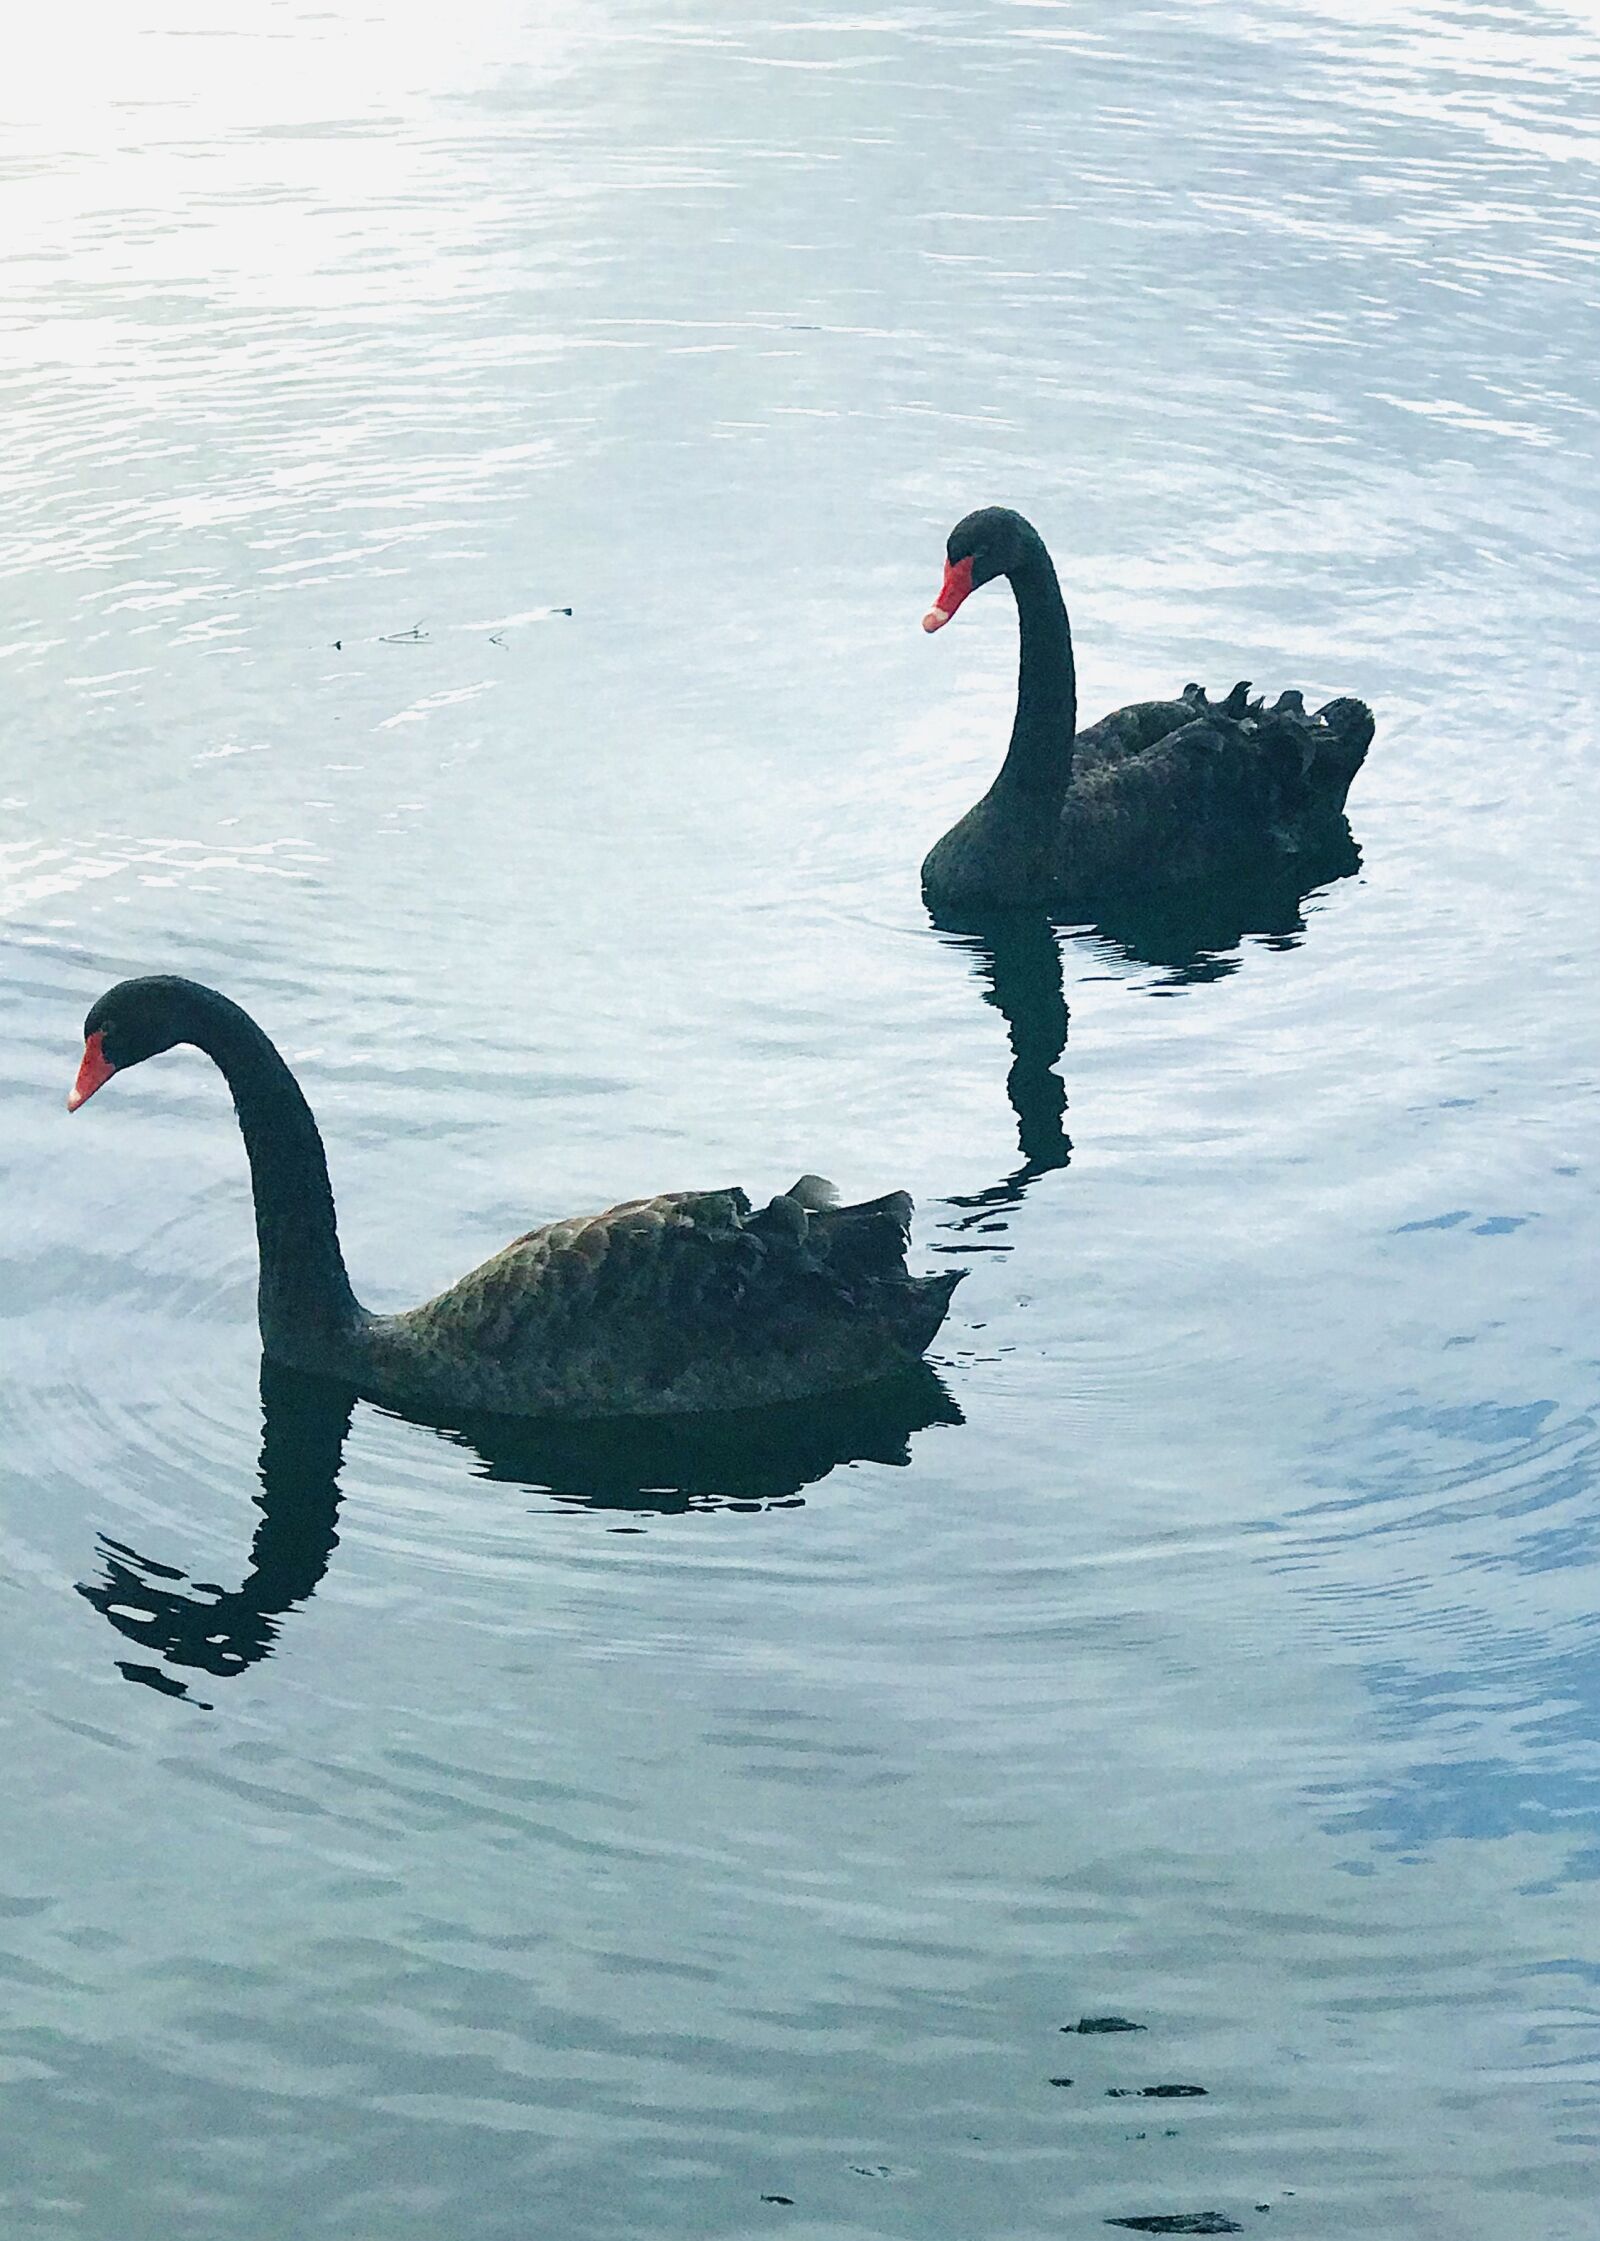 iPhone 7 Plus back dual camera 6.6mm f/2.8 sample photo. Swan, nature, animals photography